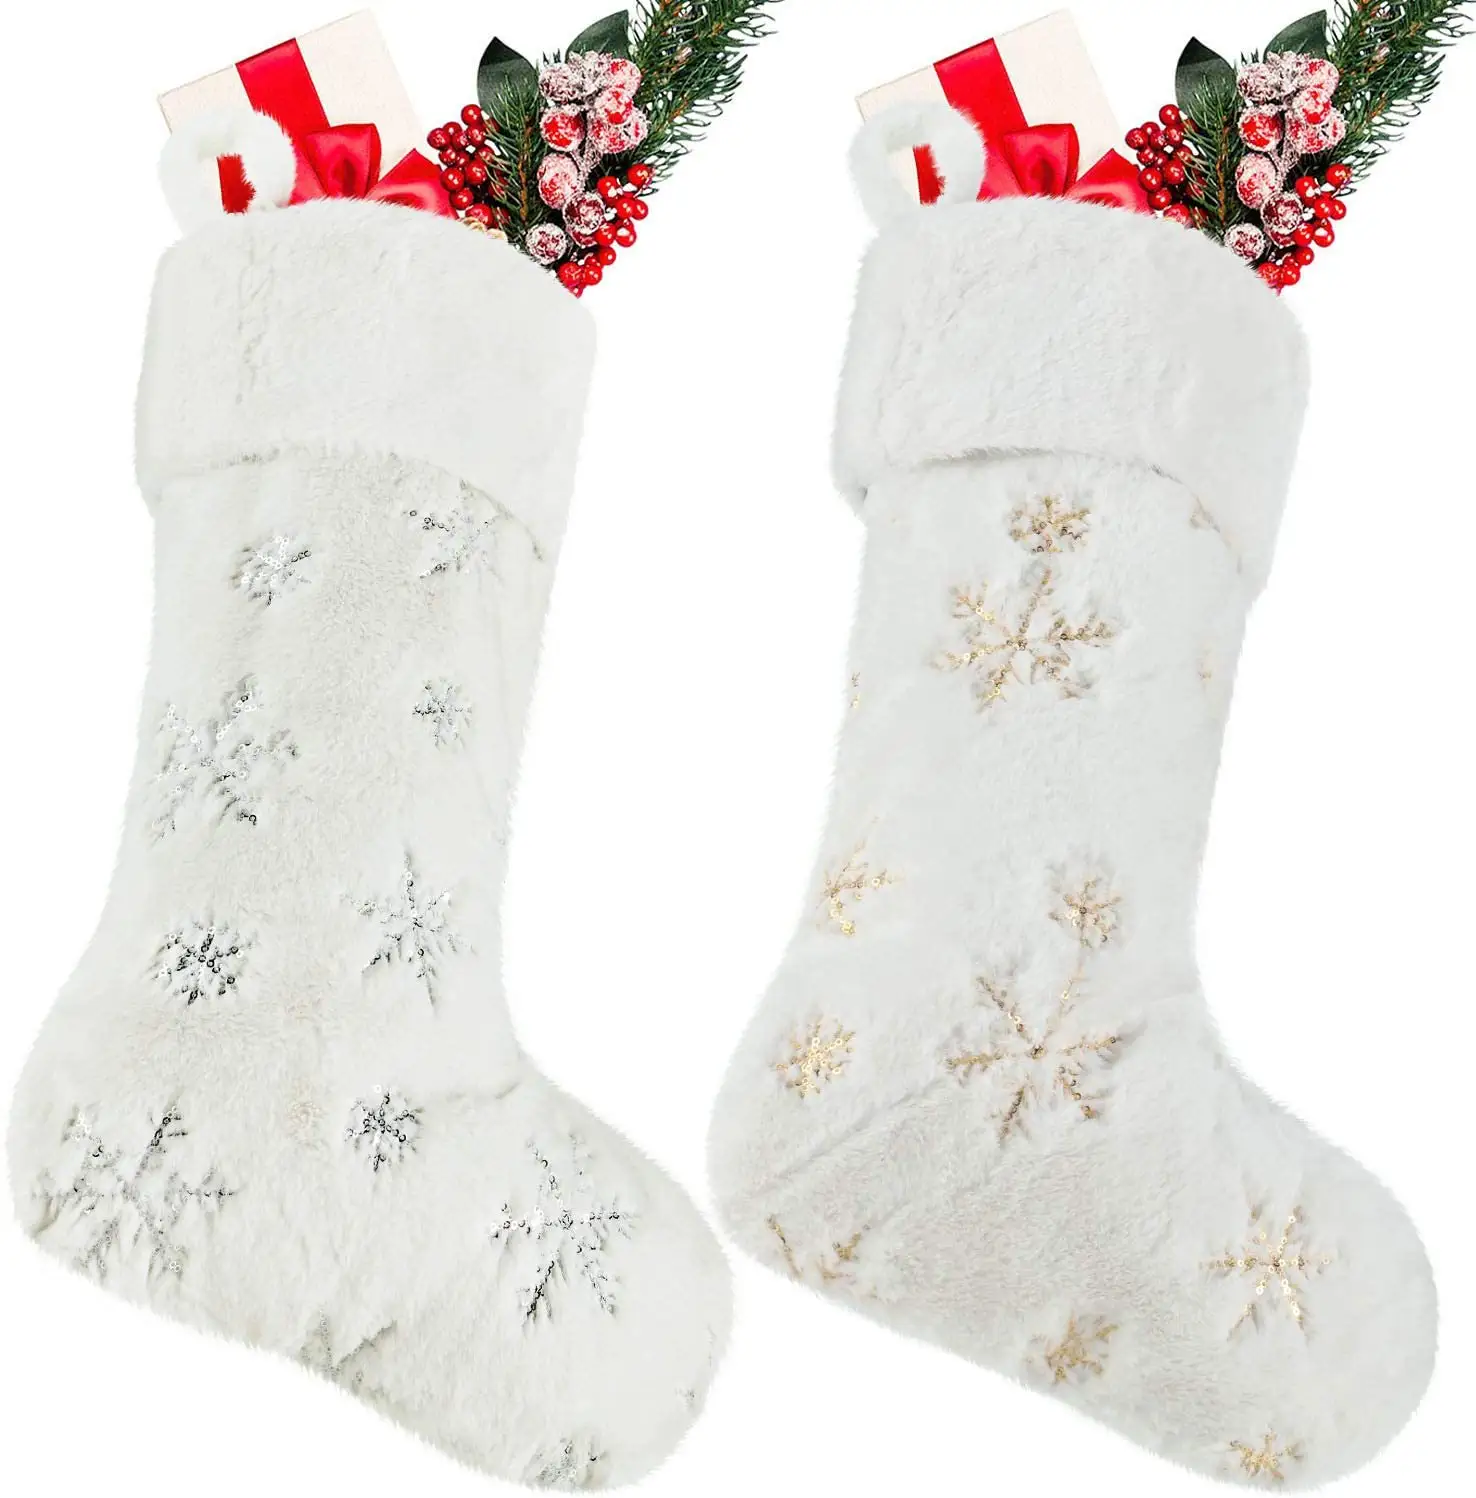 Wholesale Merry Christmas Stocking Santa Socks Festival Home Decoration Styles Party Ornament For Child Gift